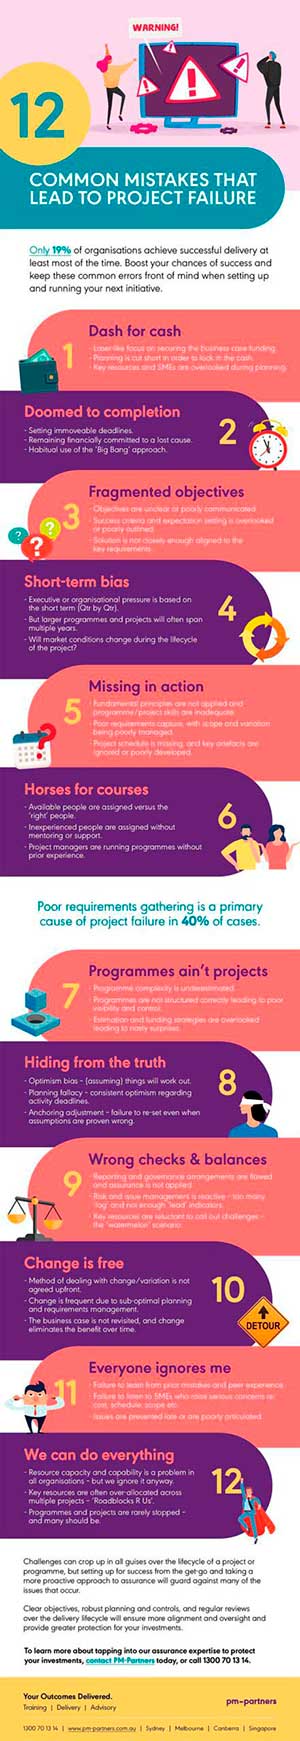 12 common mistakes that lead to project failure infographic